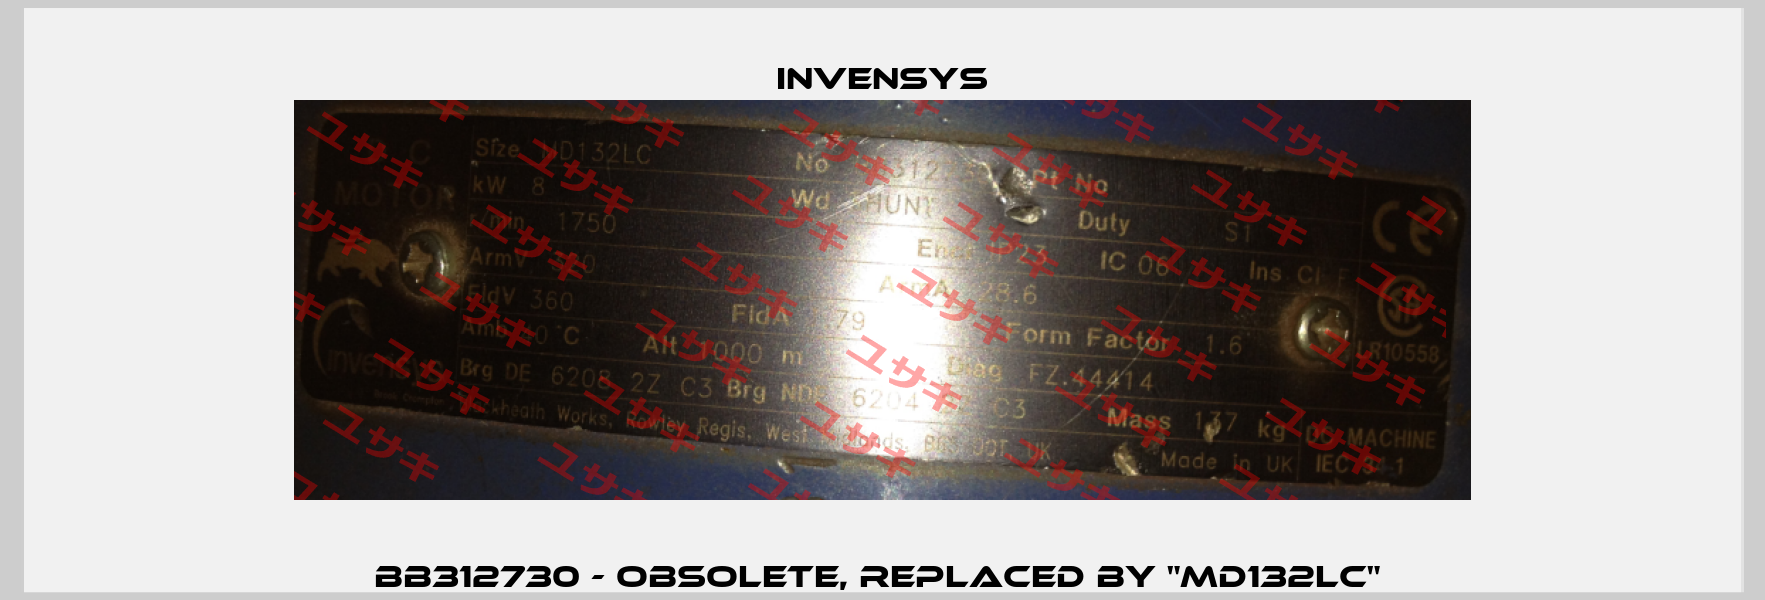 BB312730 - Obsolete, replaced by "MD132LC"  Invensys